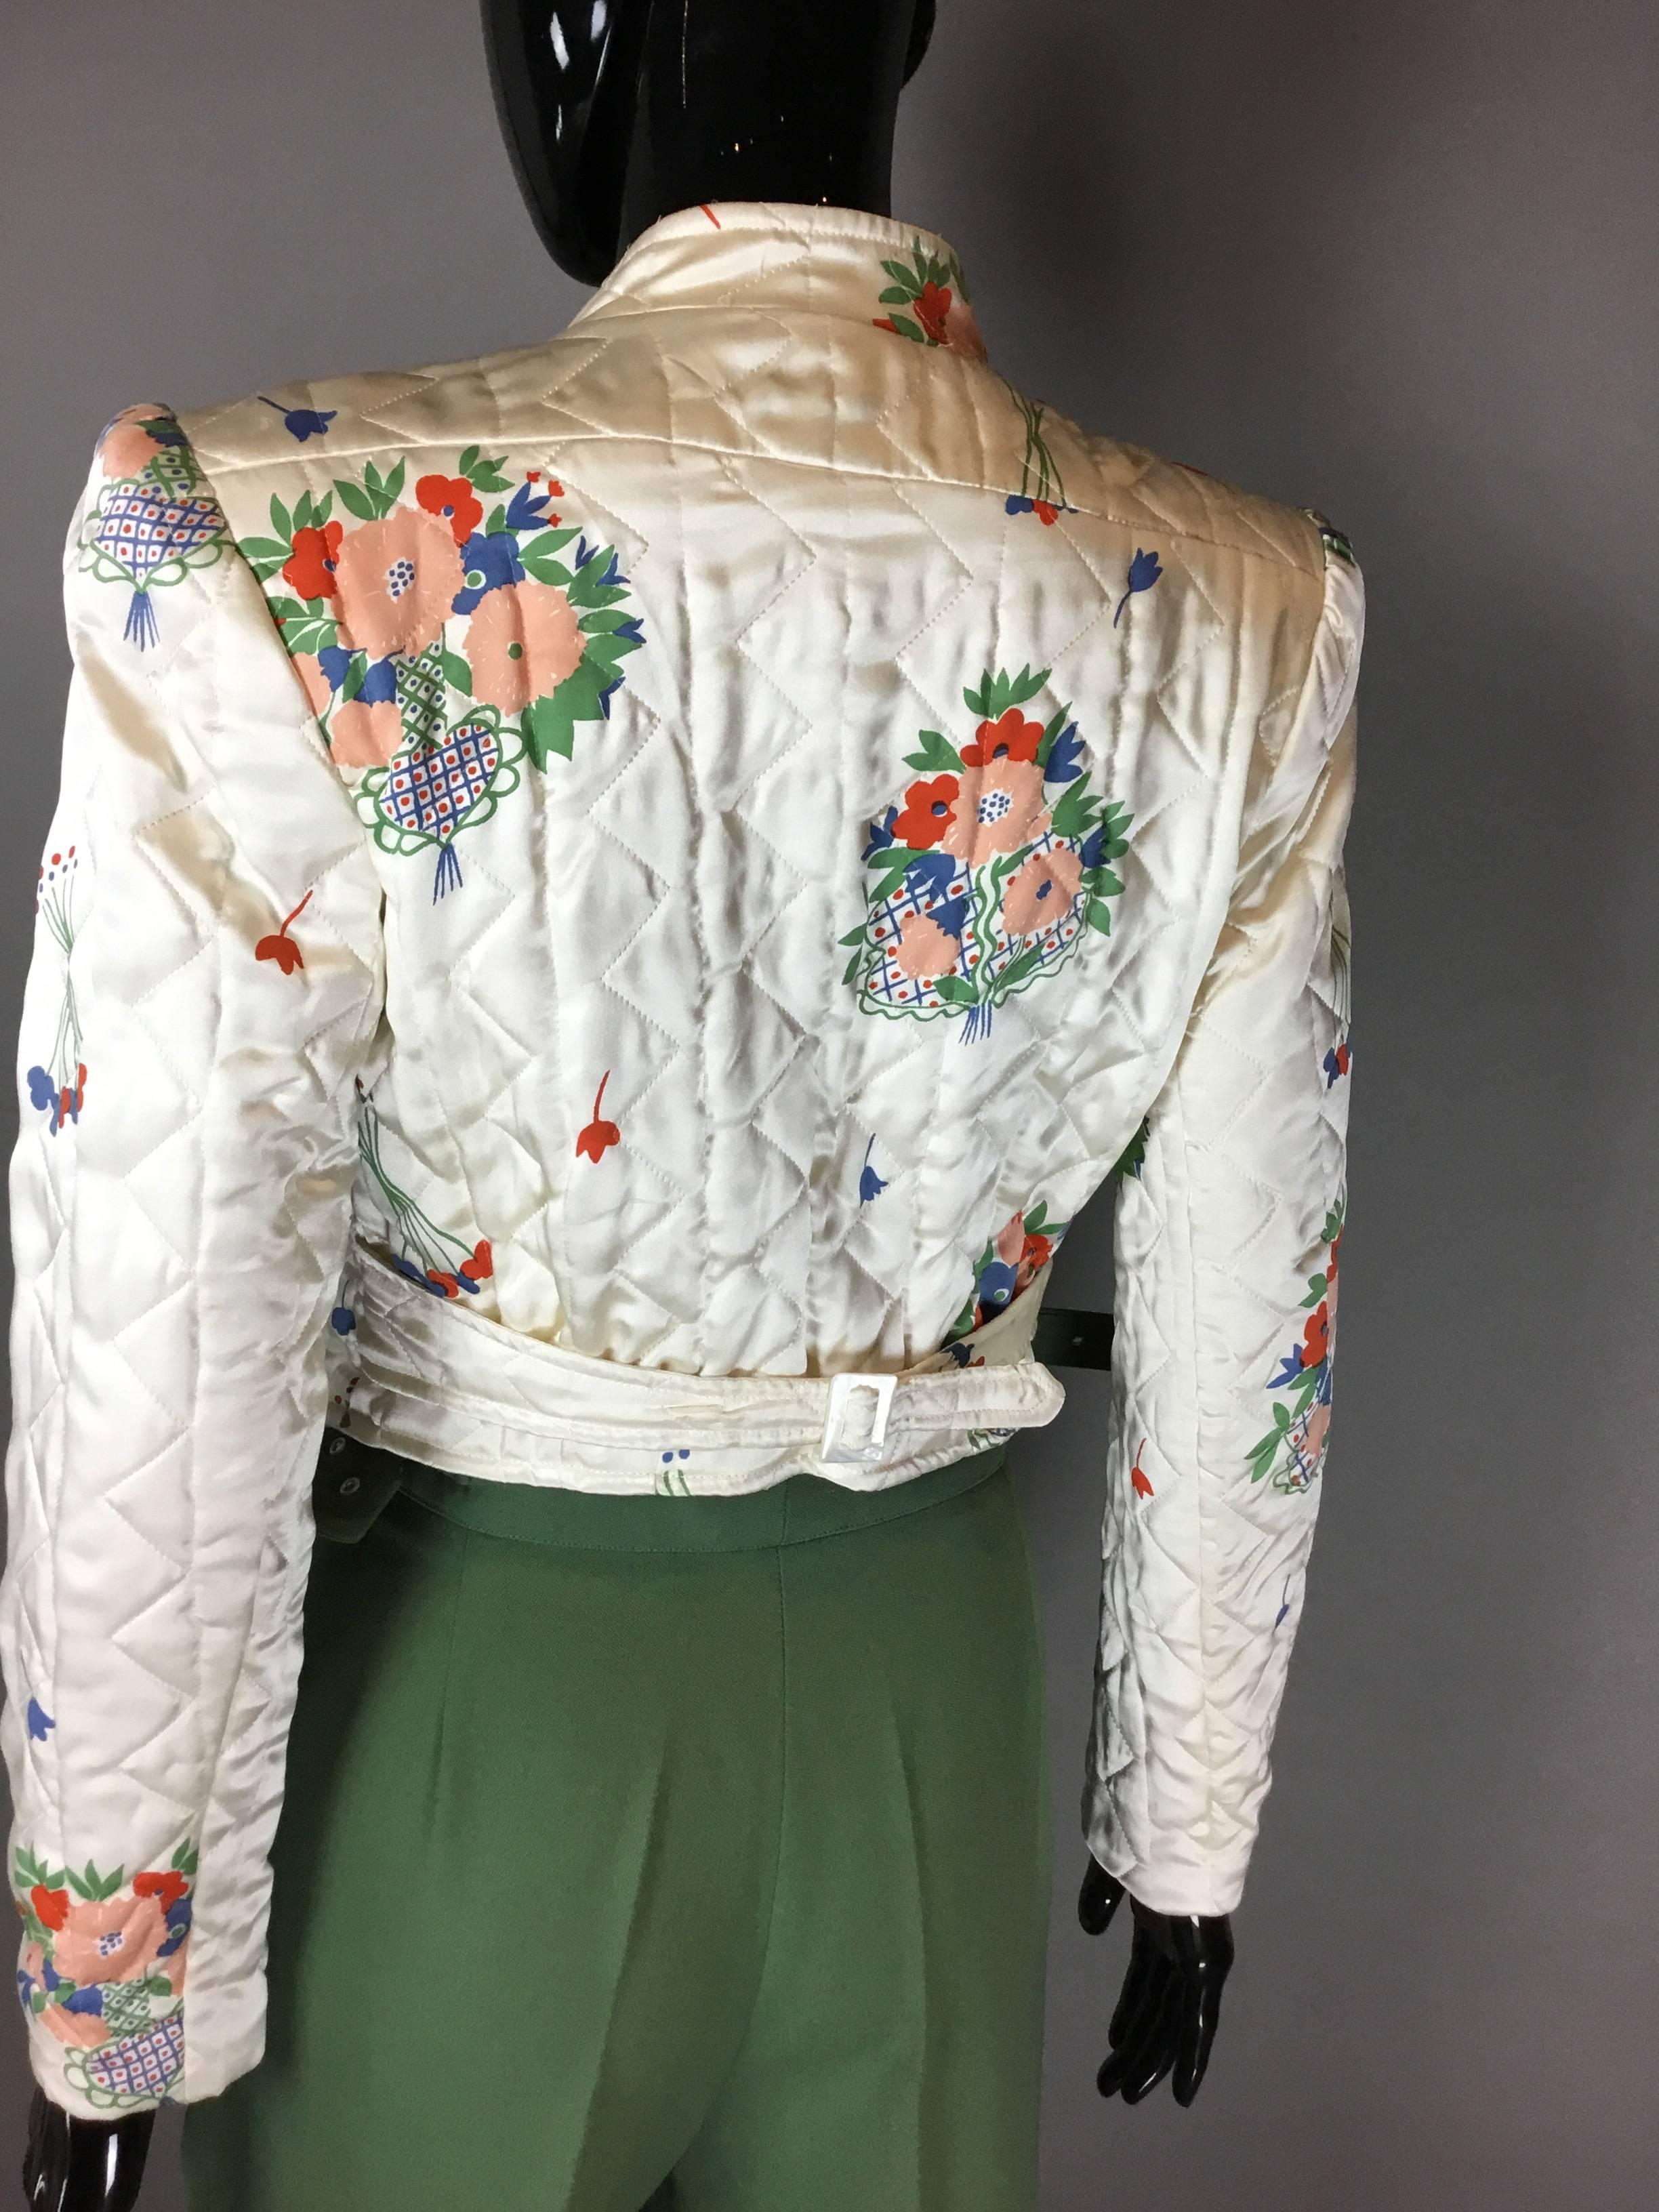 This really is a rare piece of Iconic 70s British designer Ossie Clark. his tailoring is much rarer to find. This suit was bought in auction from Ossies pattern cutter, and appears unworn.
The quilted cream satin slightly padded jacket is an almost